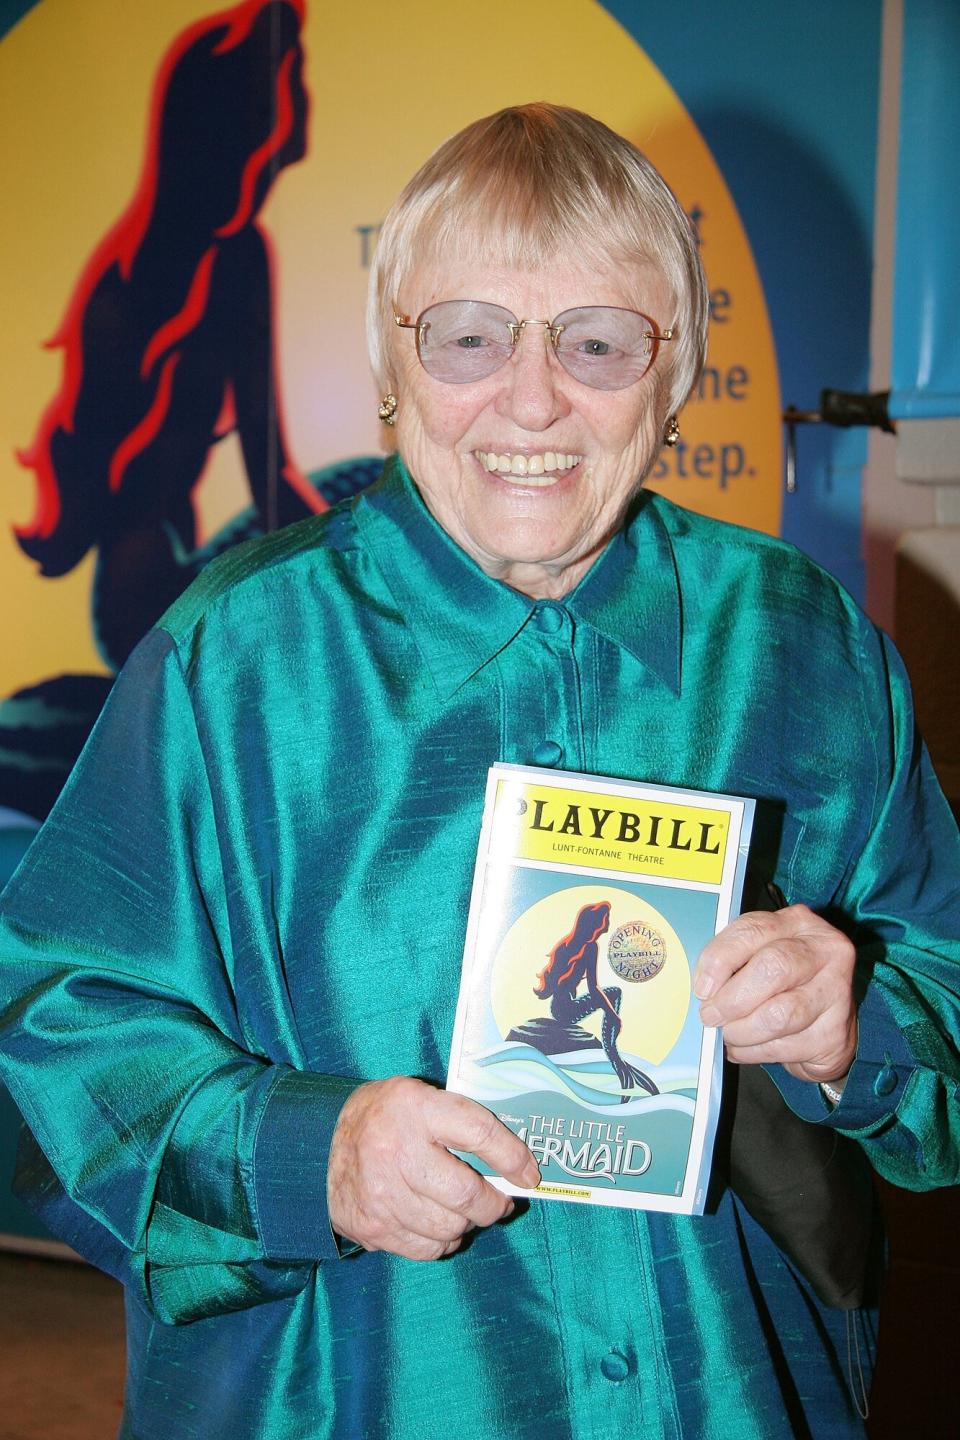 Actress Pat Carroll, the voice of Ursula in the 1989 film,arrives at opening night of "The Little Mermaid" on Broadway at the Lunt-Fontanne Theater on January 10, 2008 in New York City.